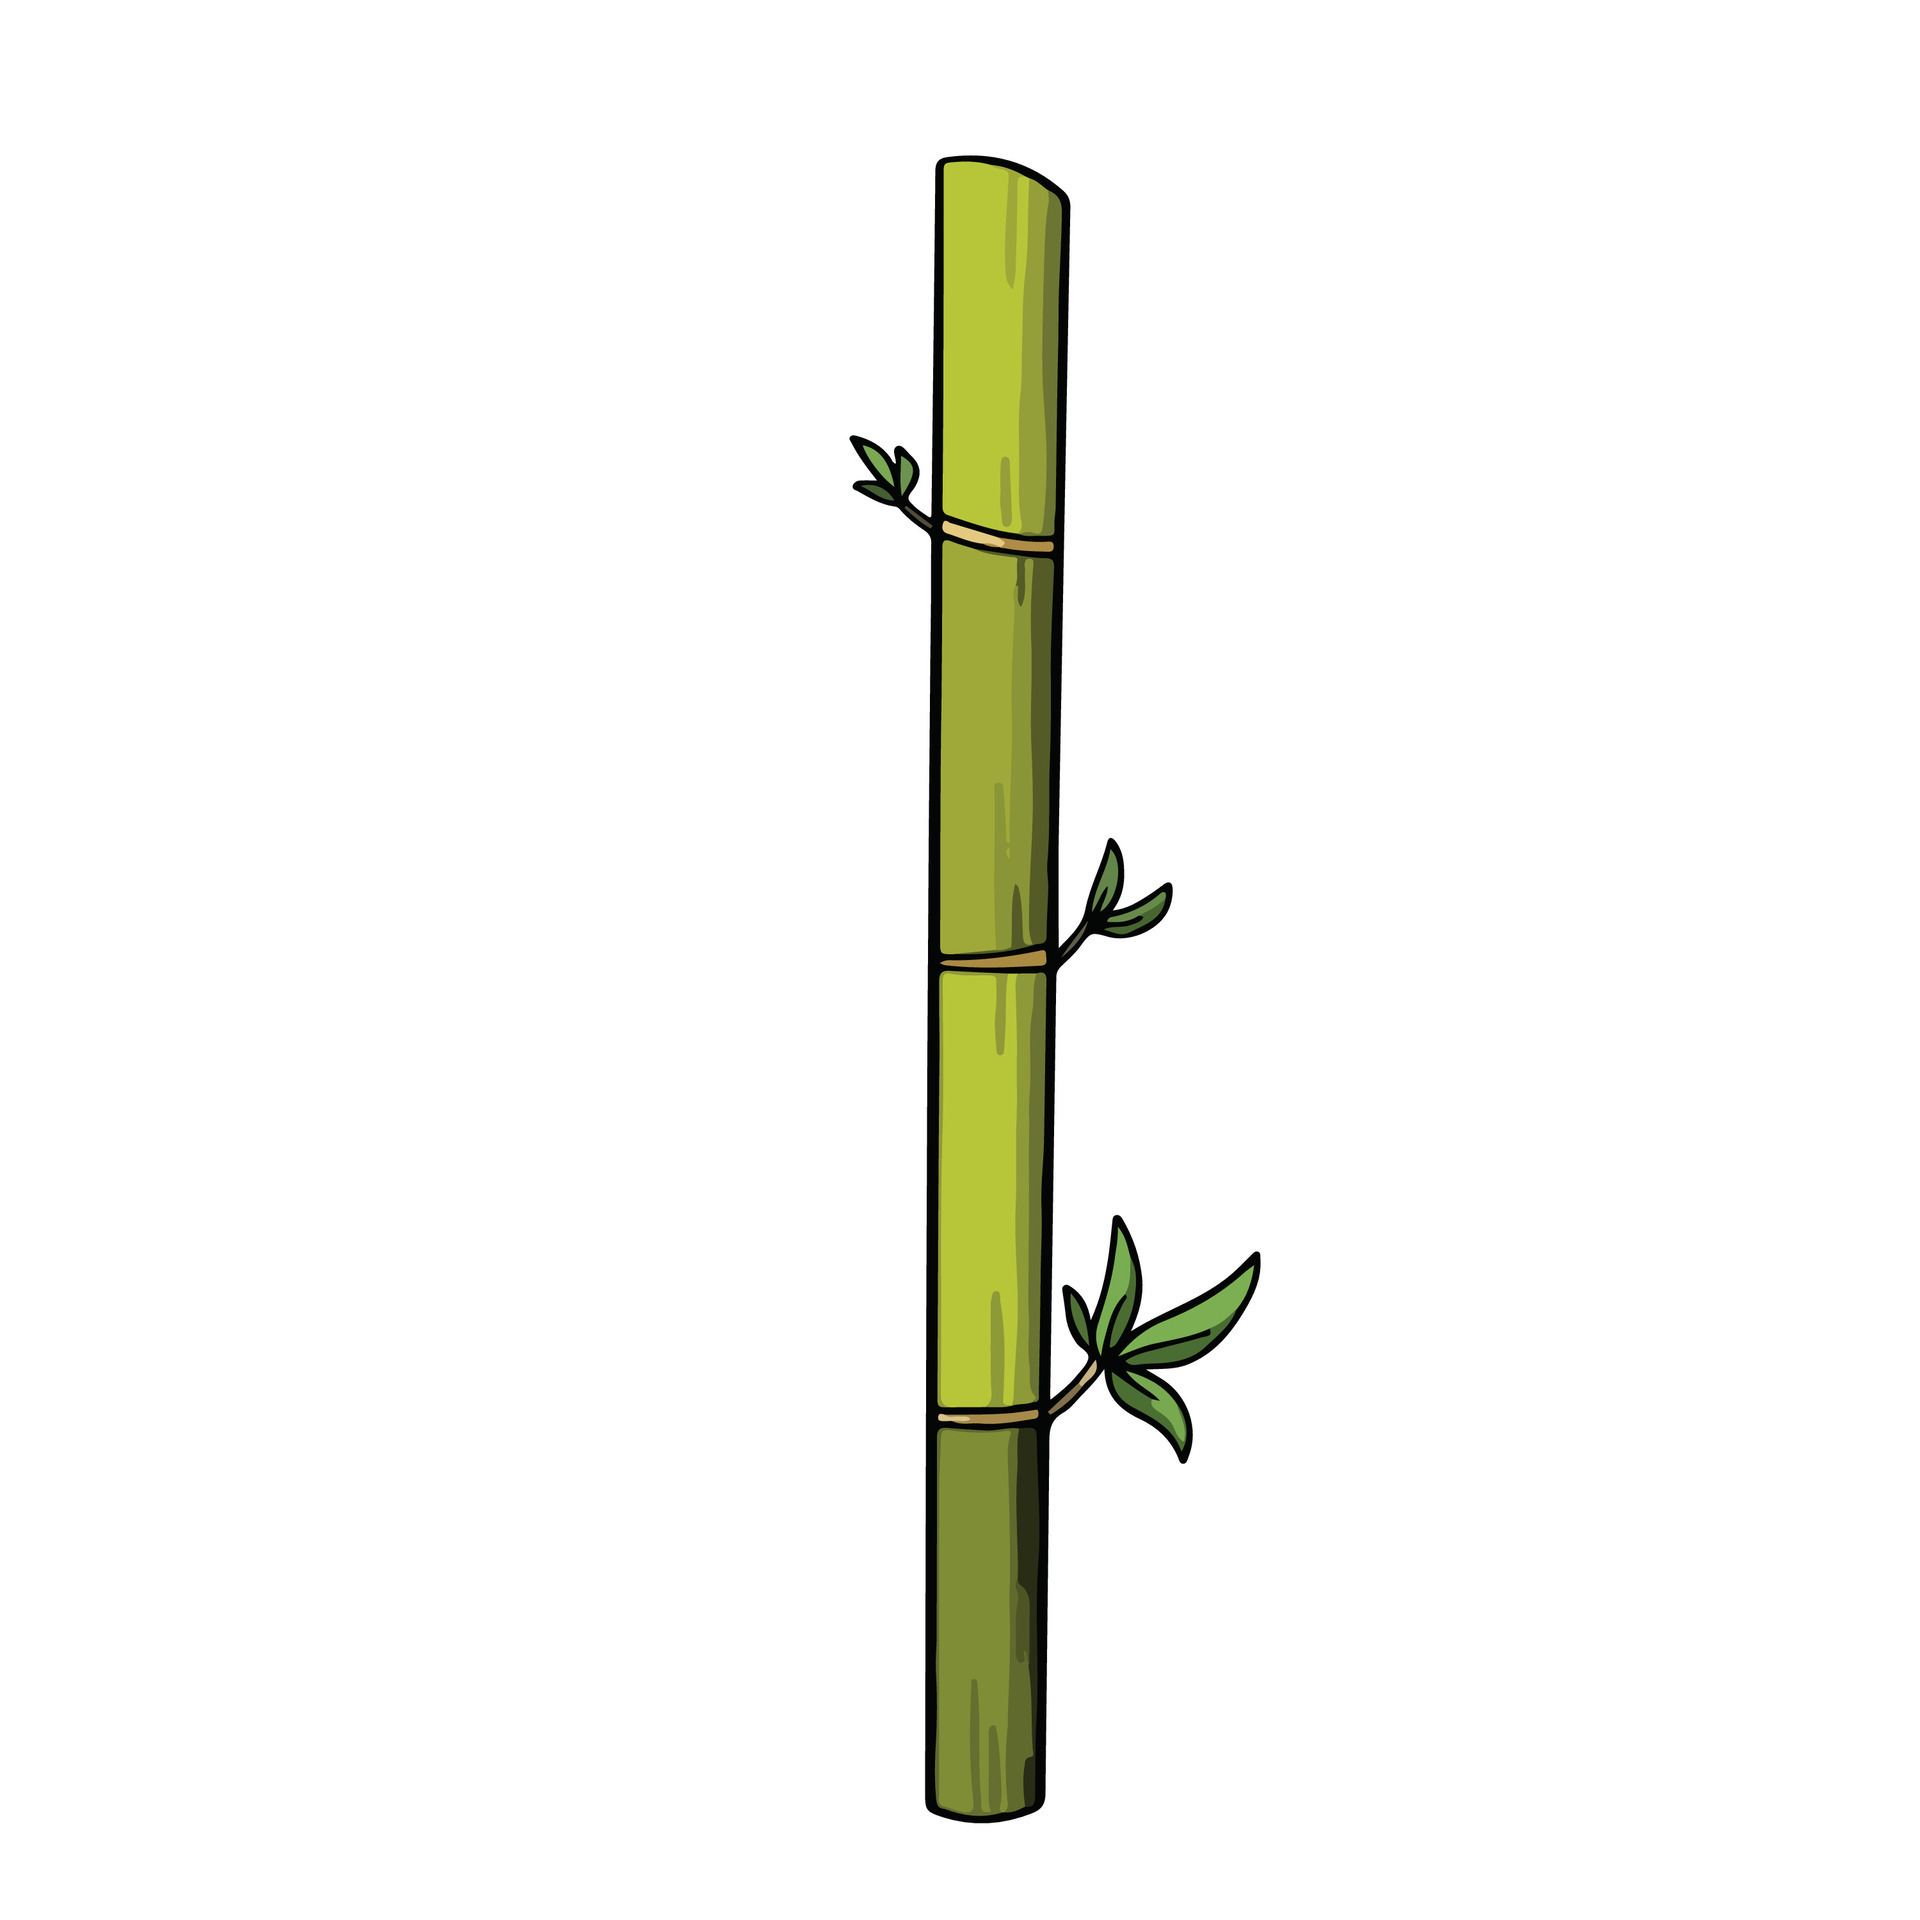 One bamboo branch stick plant vector illustration with outline